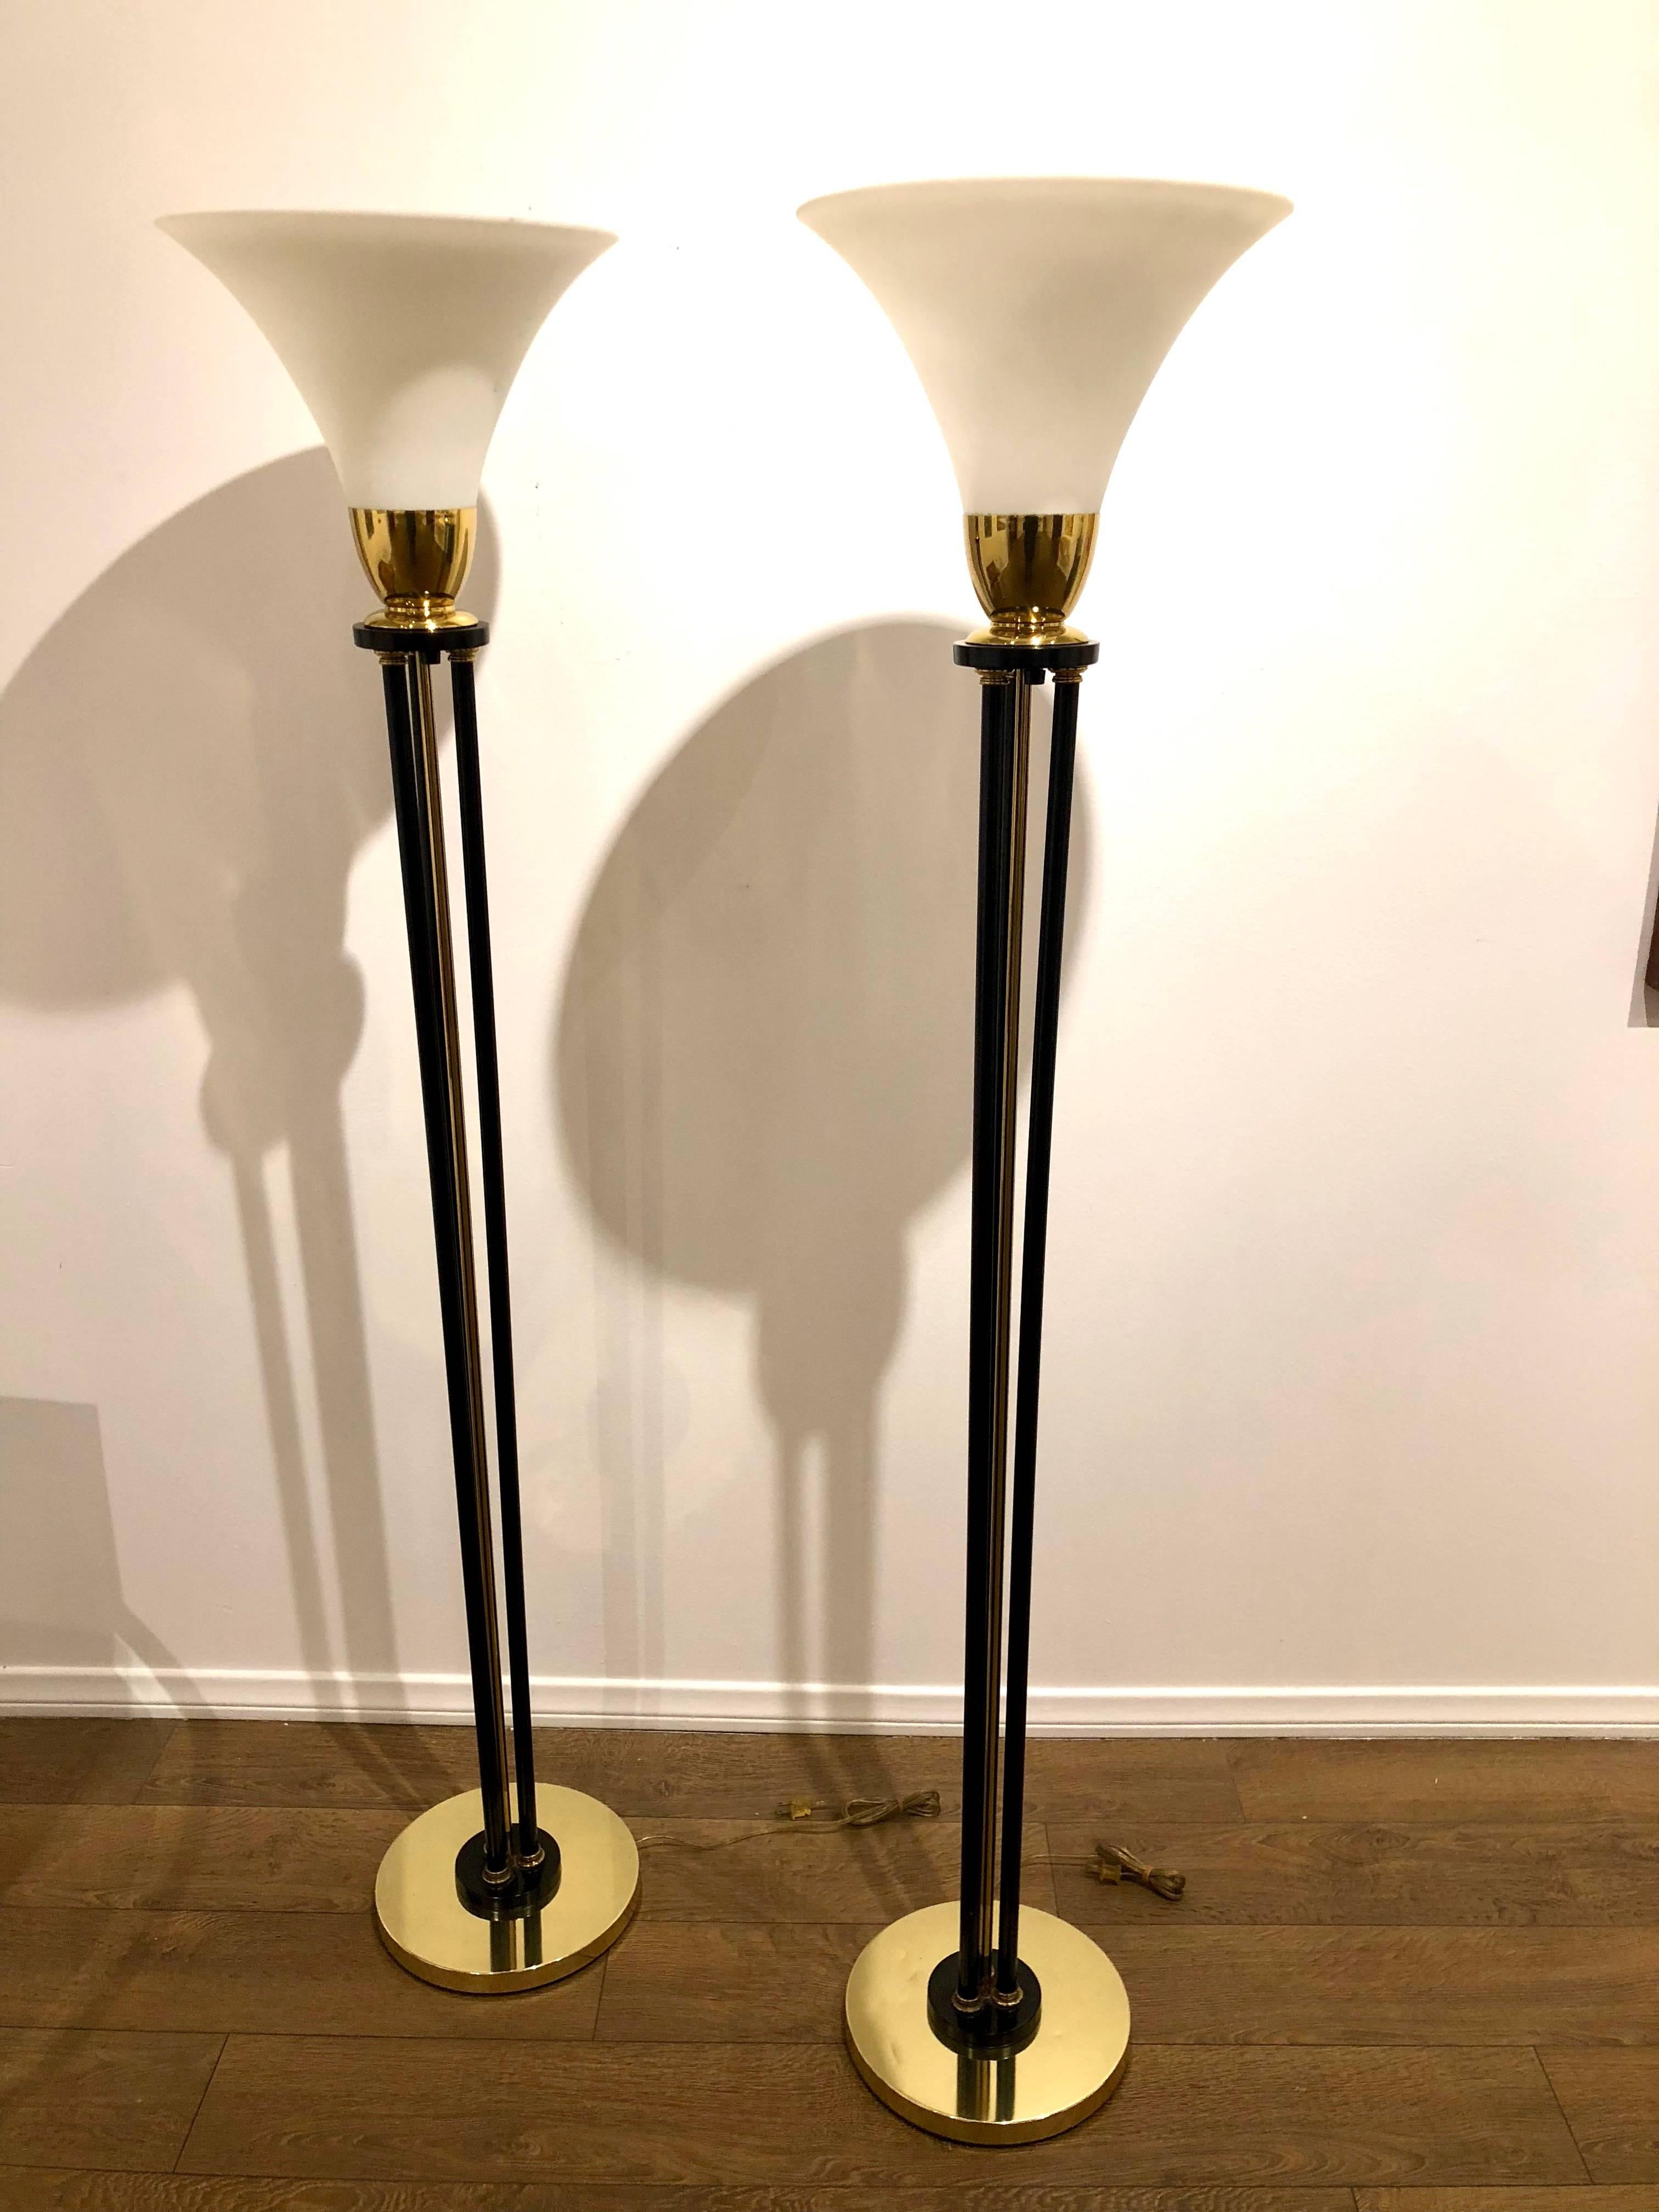 American Pair of Art Deco Floor Lamps in Brass, Metal and Trumpet Glass Shape